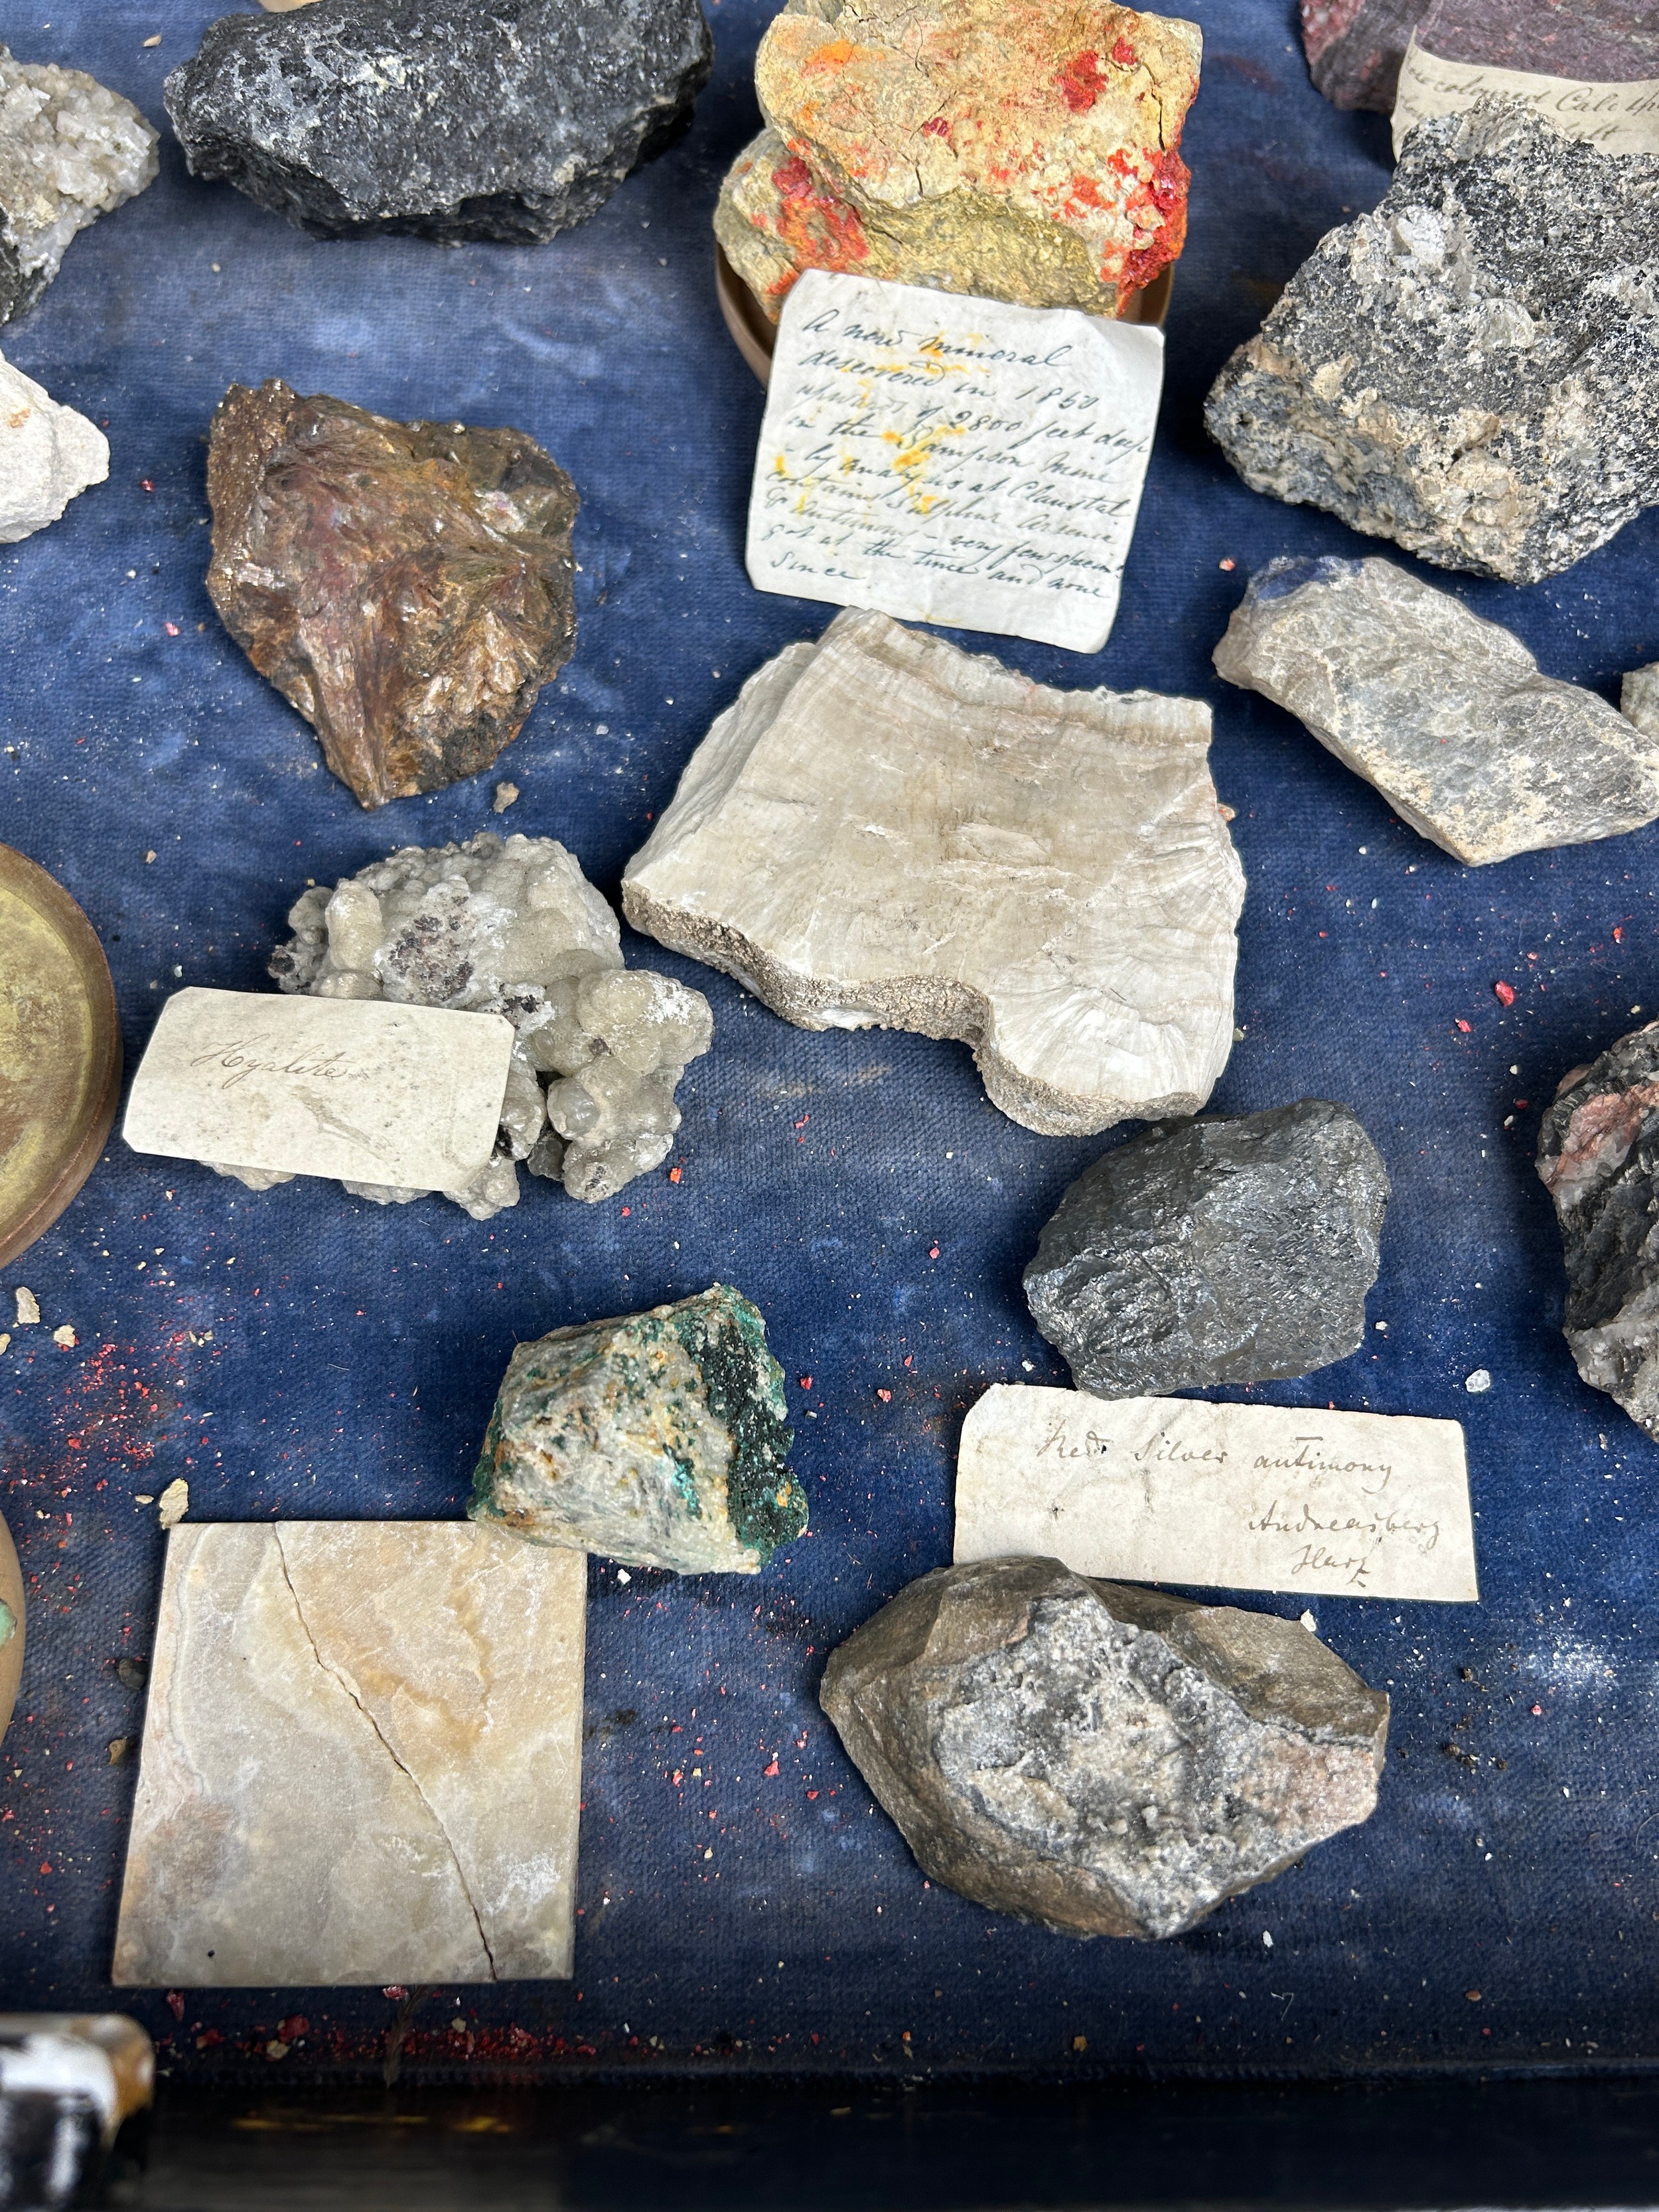 A RARE CABINET COLLECTION OF MINERALS CIRCA 1810-1860, including labels for some very important - Image 27 of 30